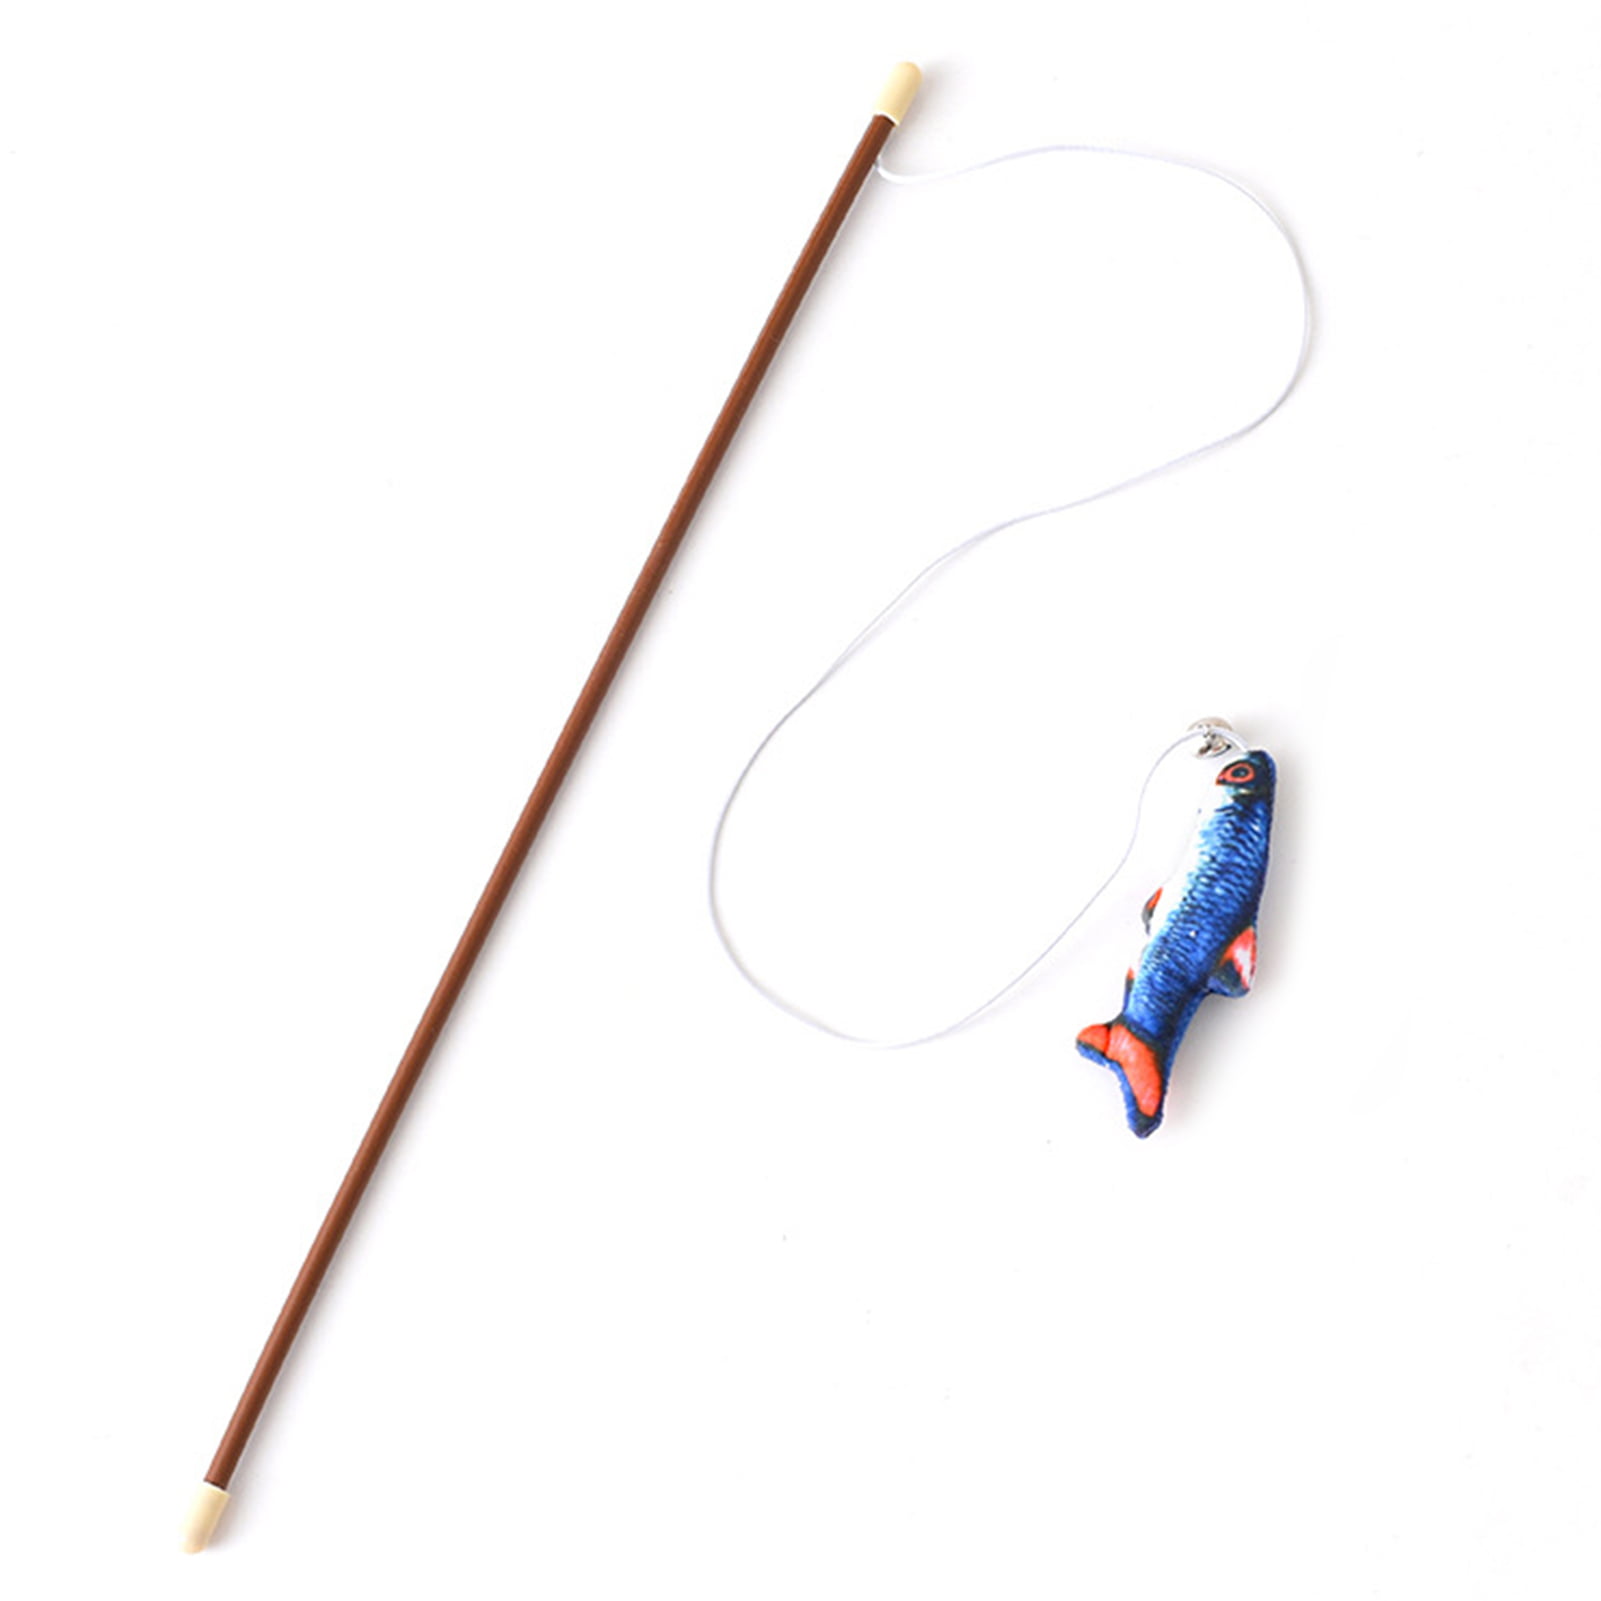 Reheyre Cat Stick Toy Resistant to Bite Stress Relief Long Fishing